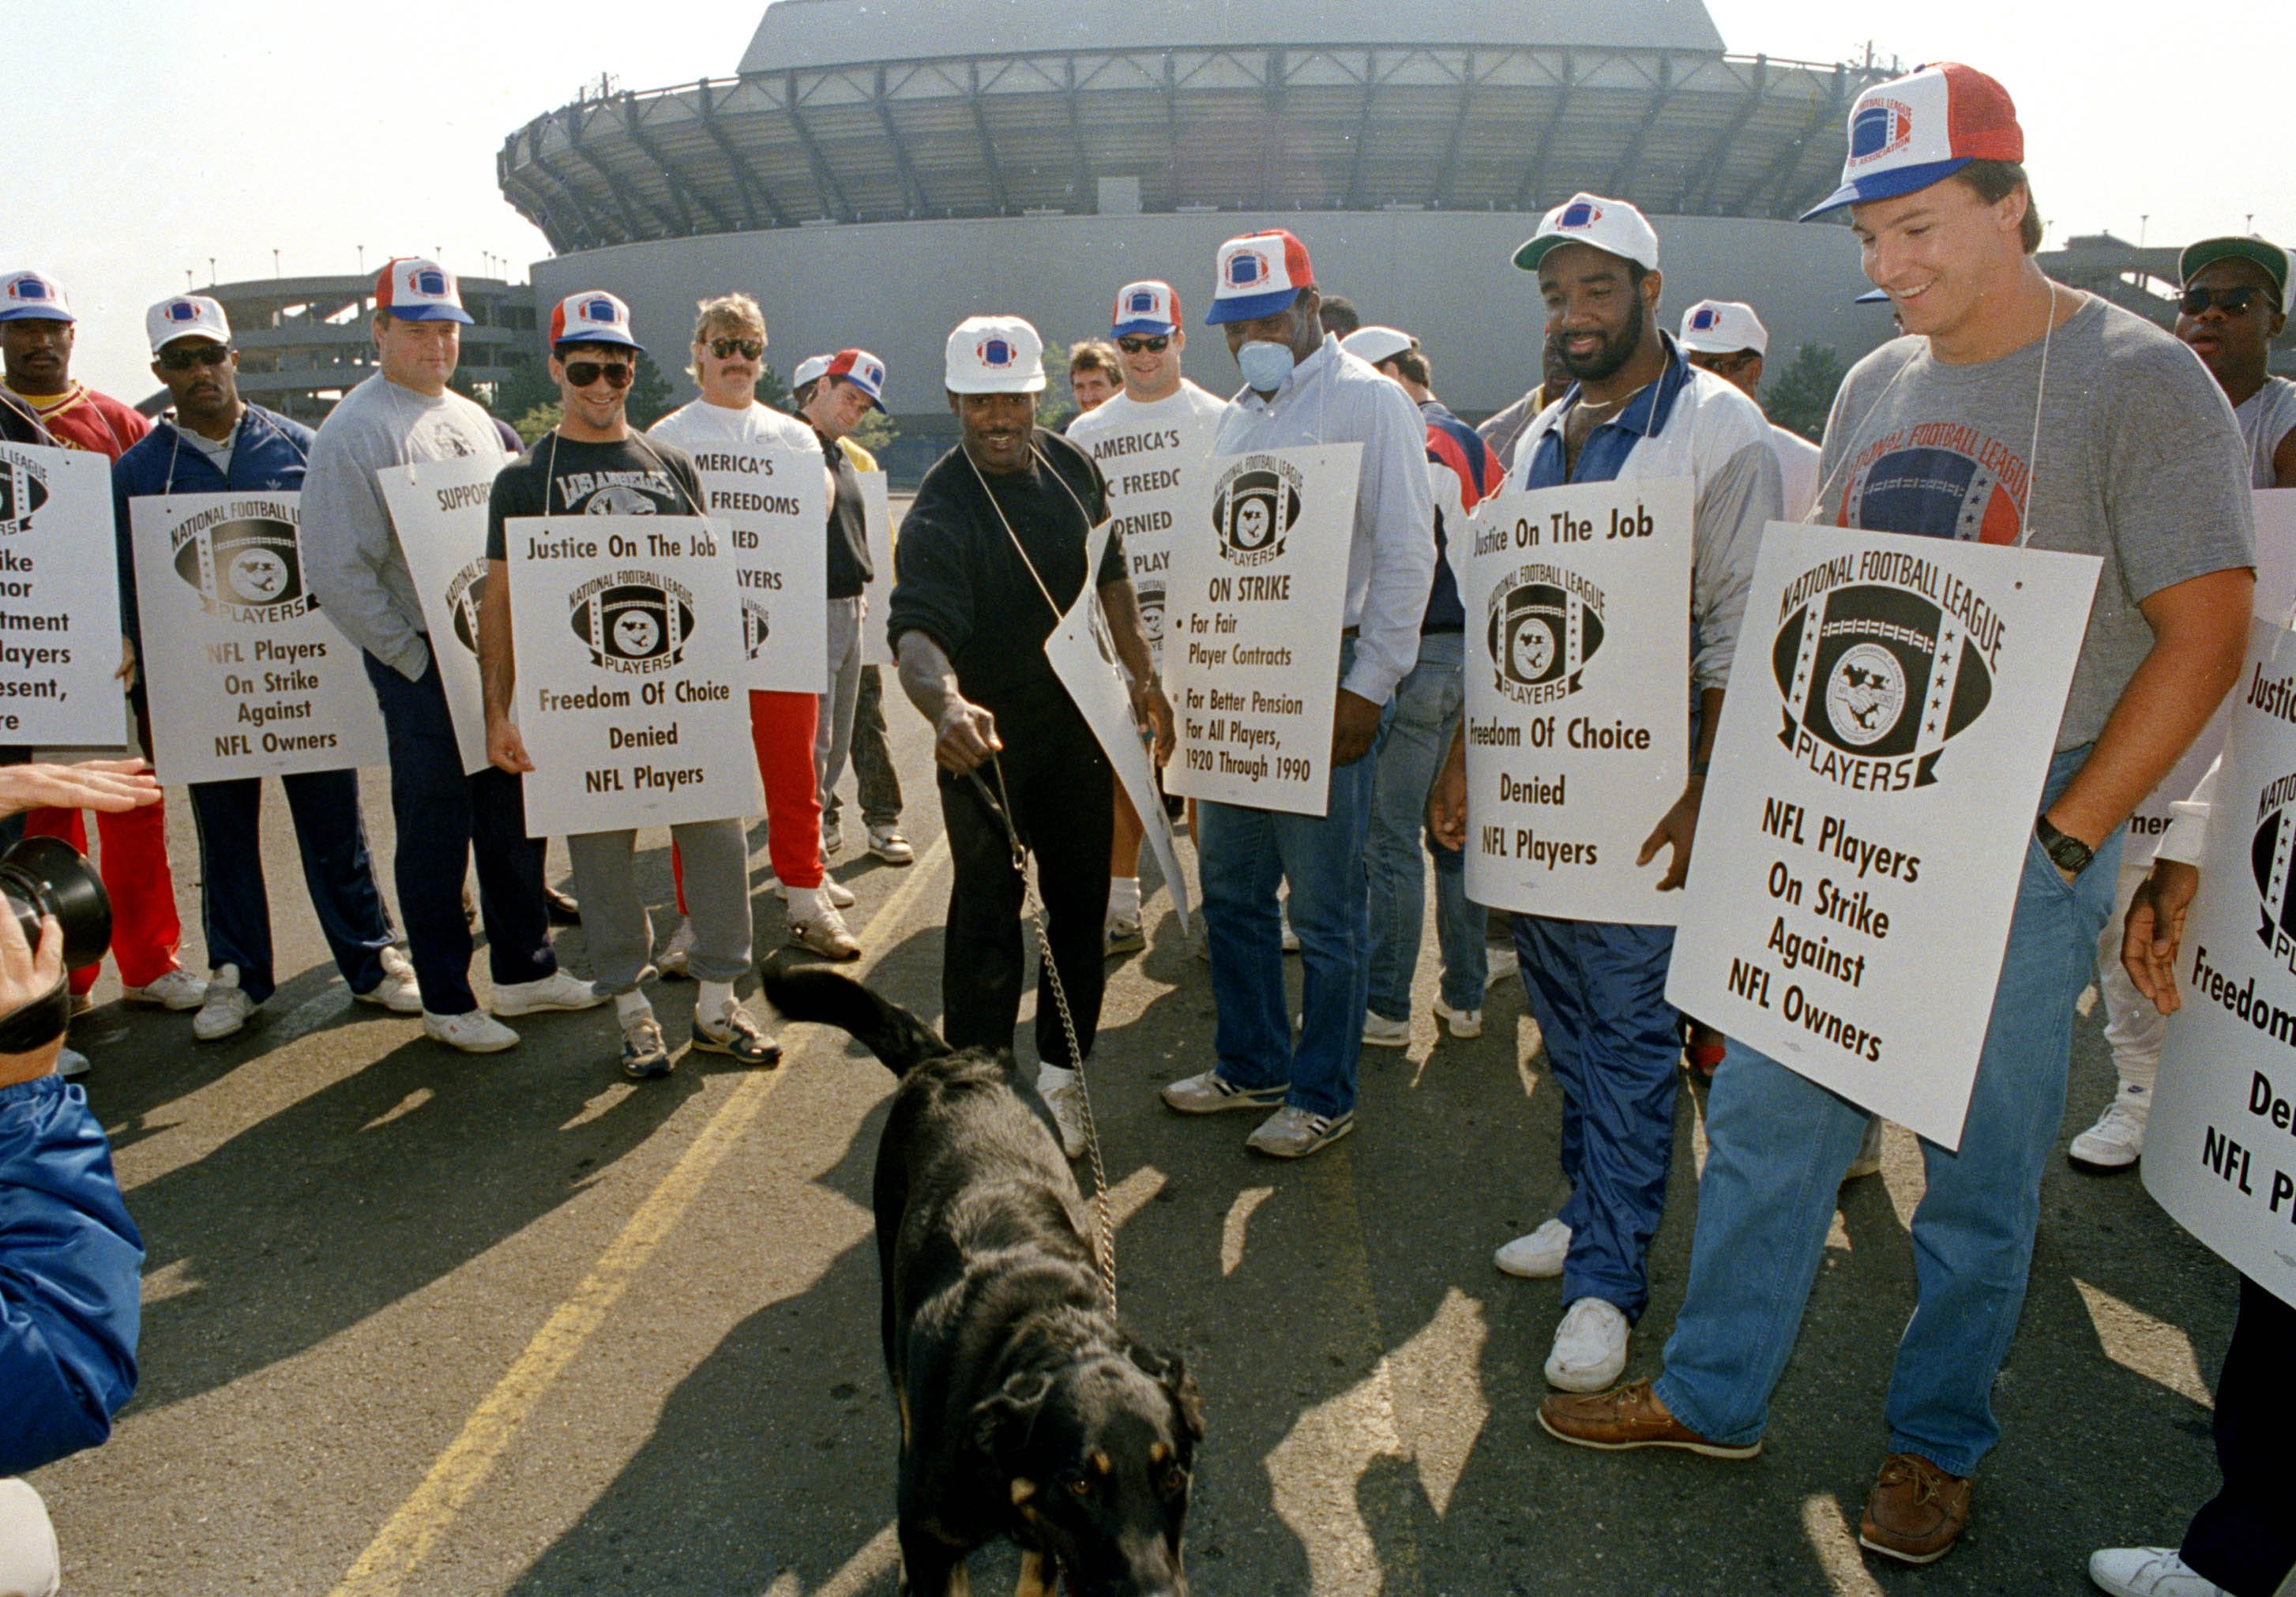 New York Giants players stand in a picket line outside Giants Stadium during the NFL players strike in September 1987.